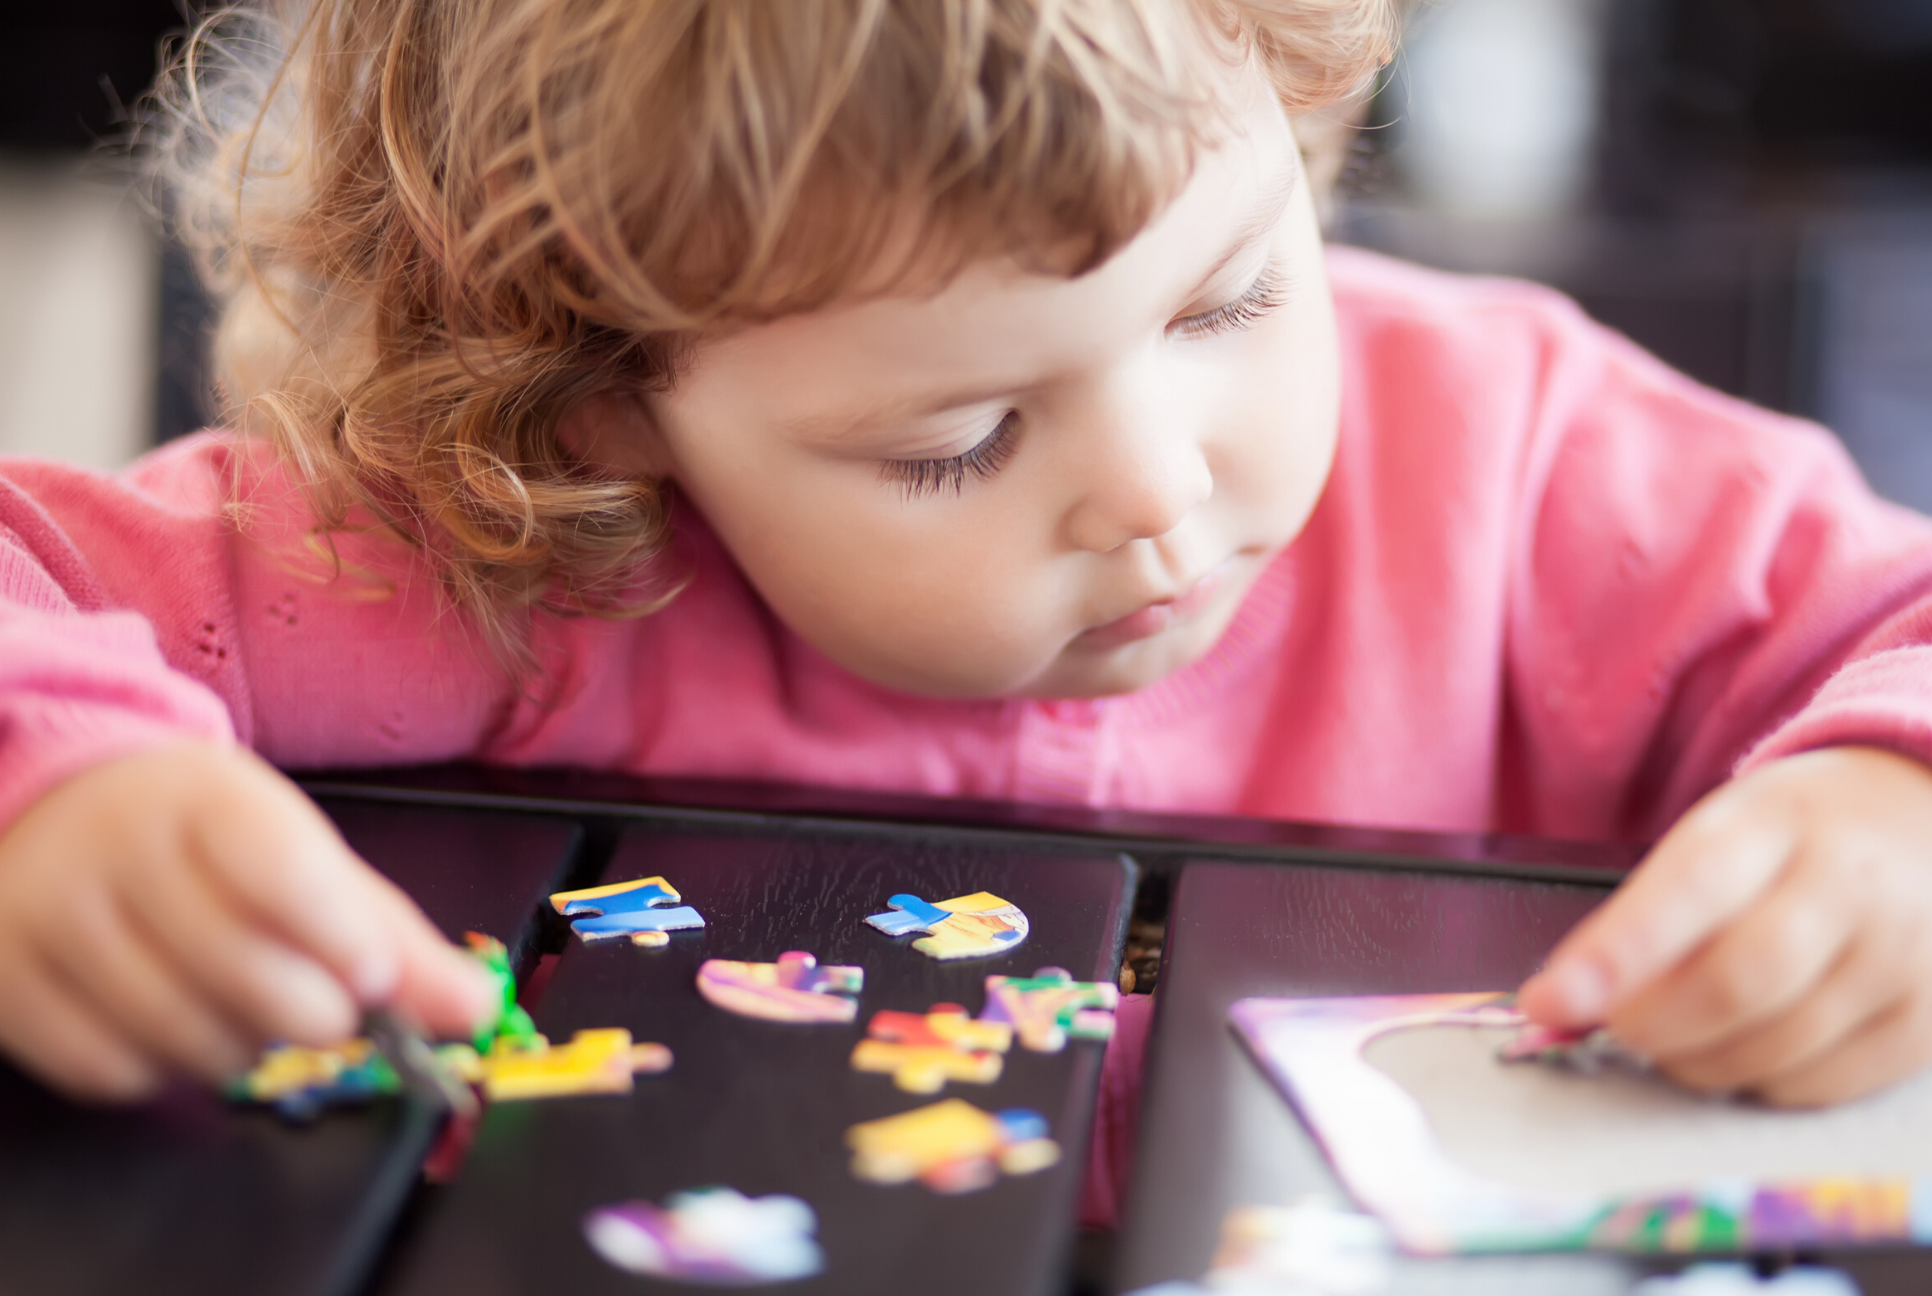 toddler in pink shirt putting puzzle pieces together